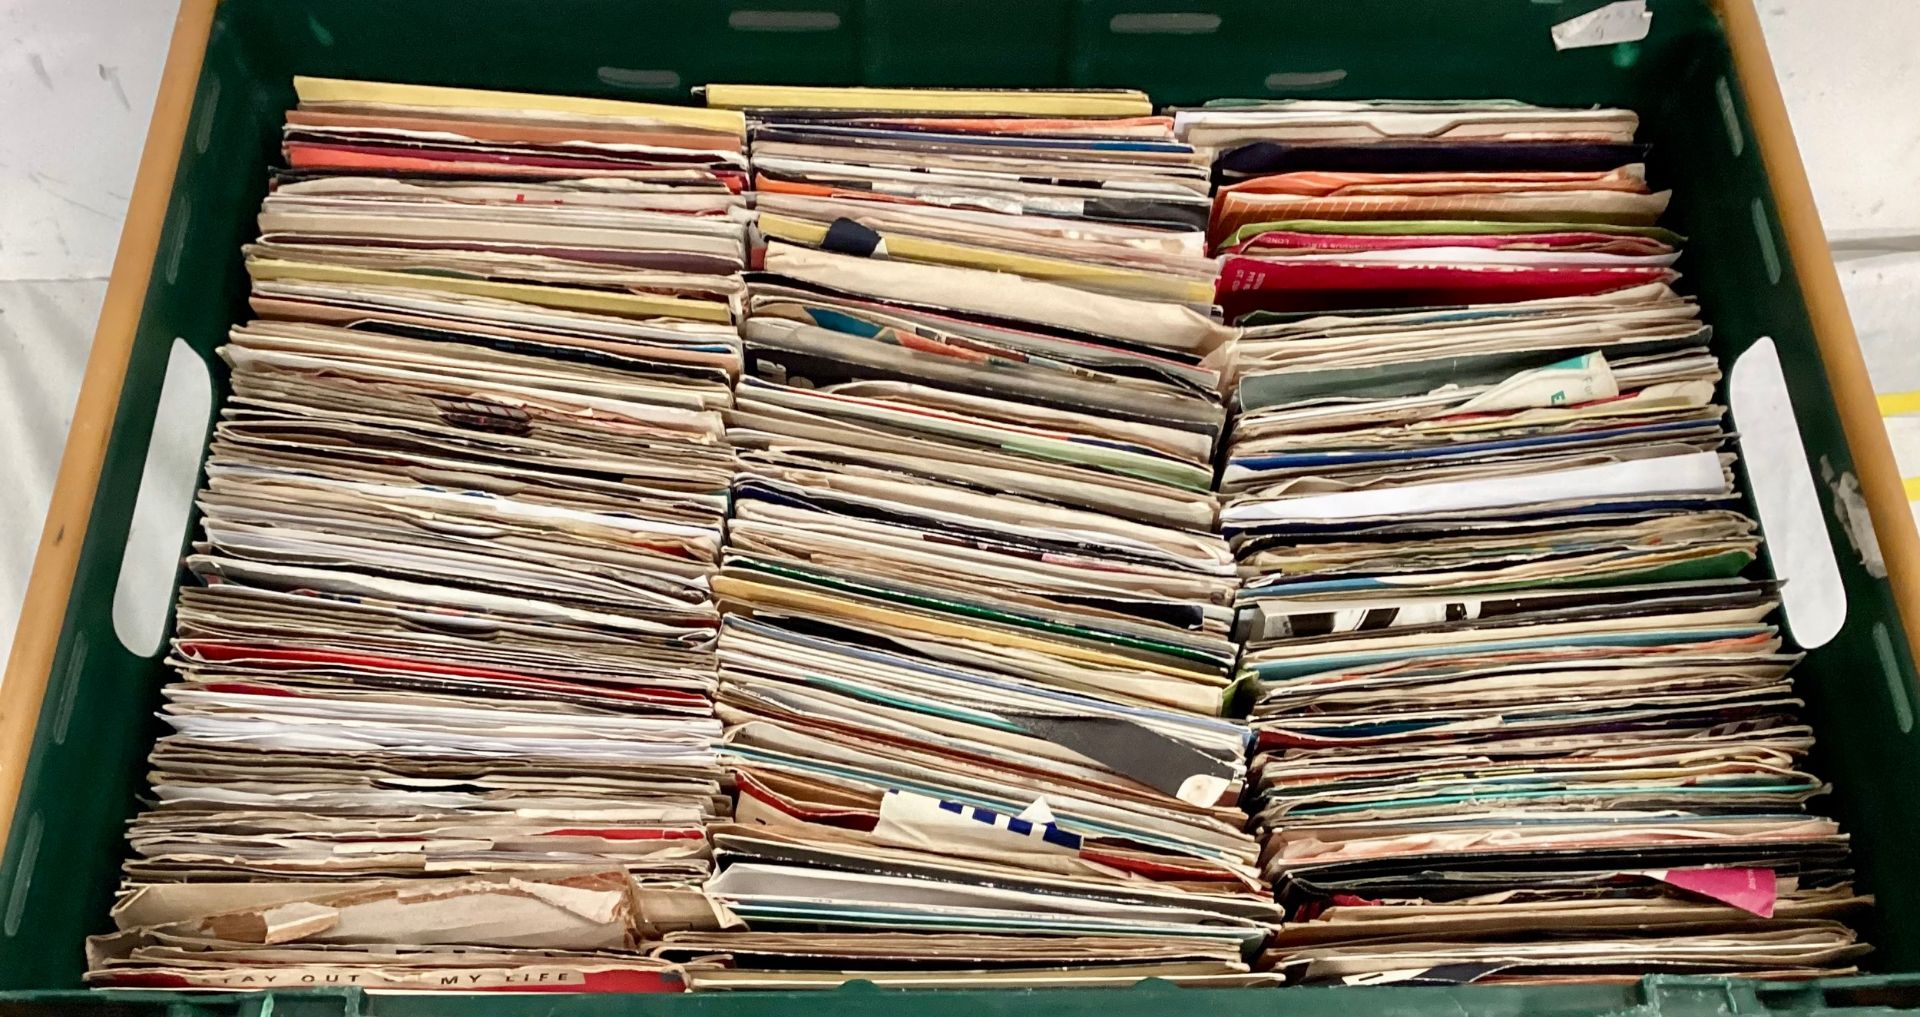 LARGE TRAY OF VARIOUS 7” SINGLES. There is many genres and artists found amounts this mixture and